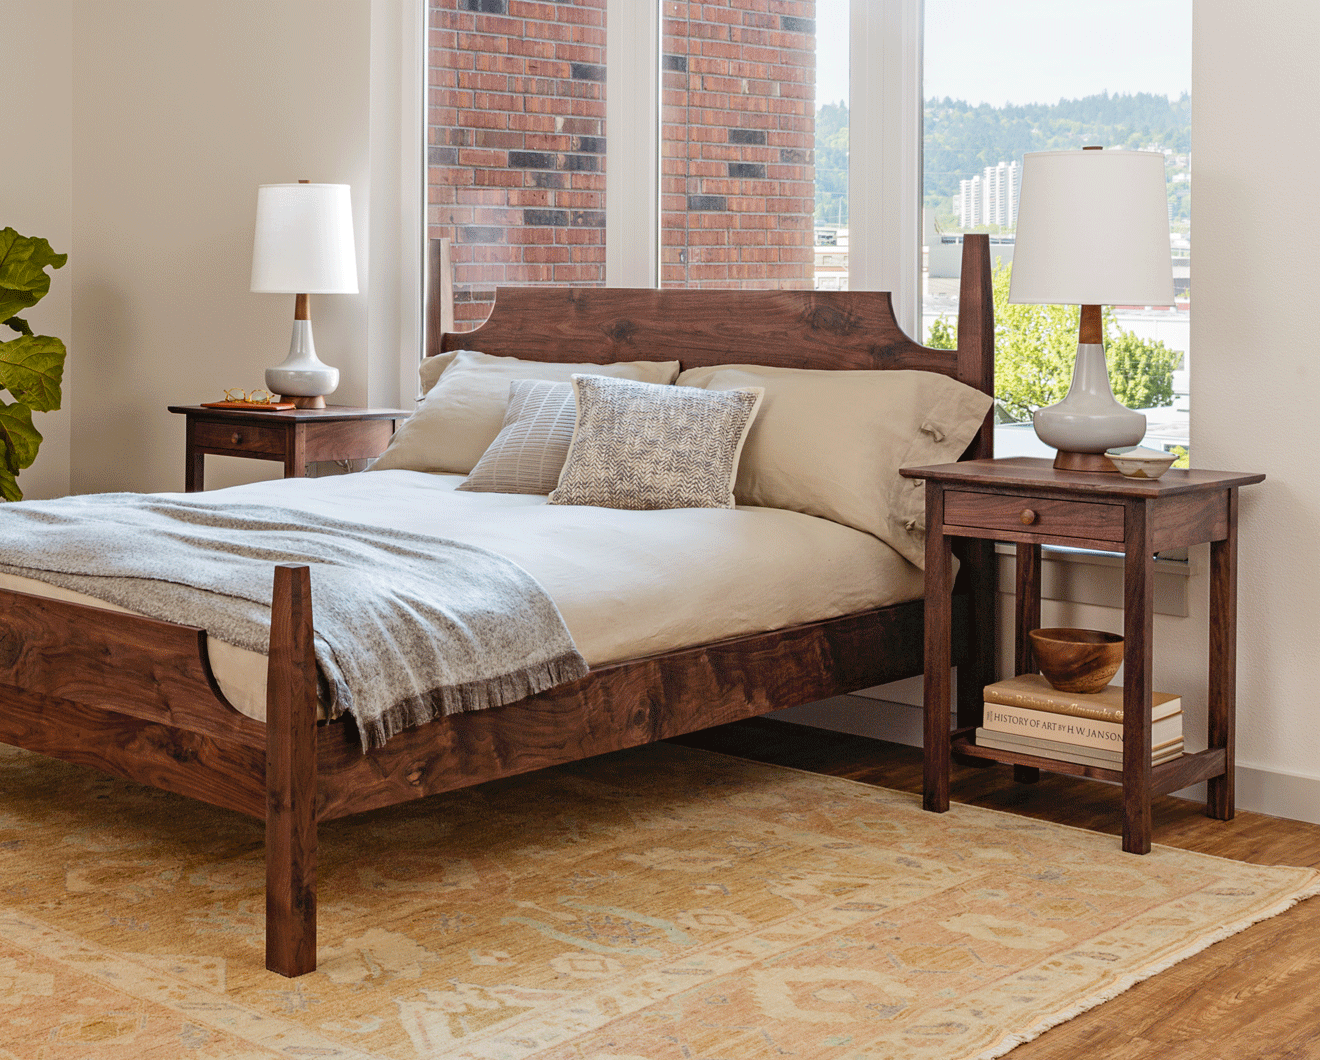 Shaker Nighstands in Western Walnut with Arts and Crafts Bed